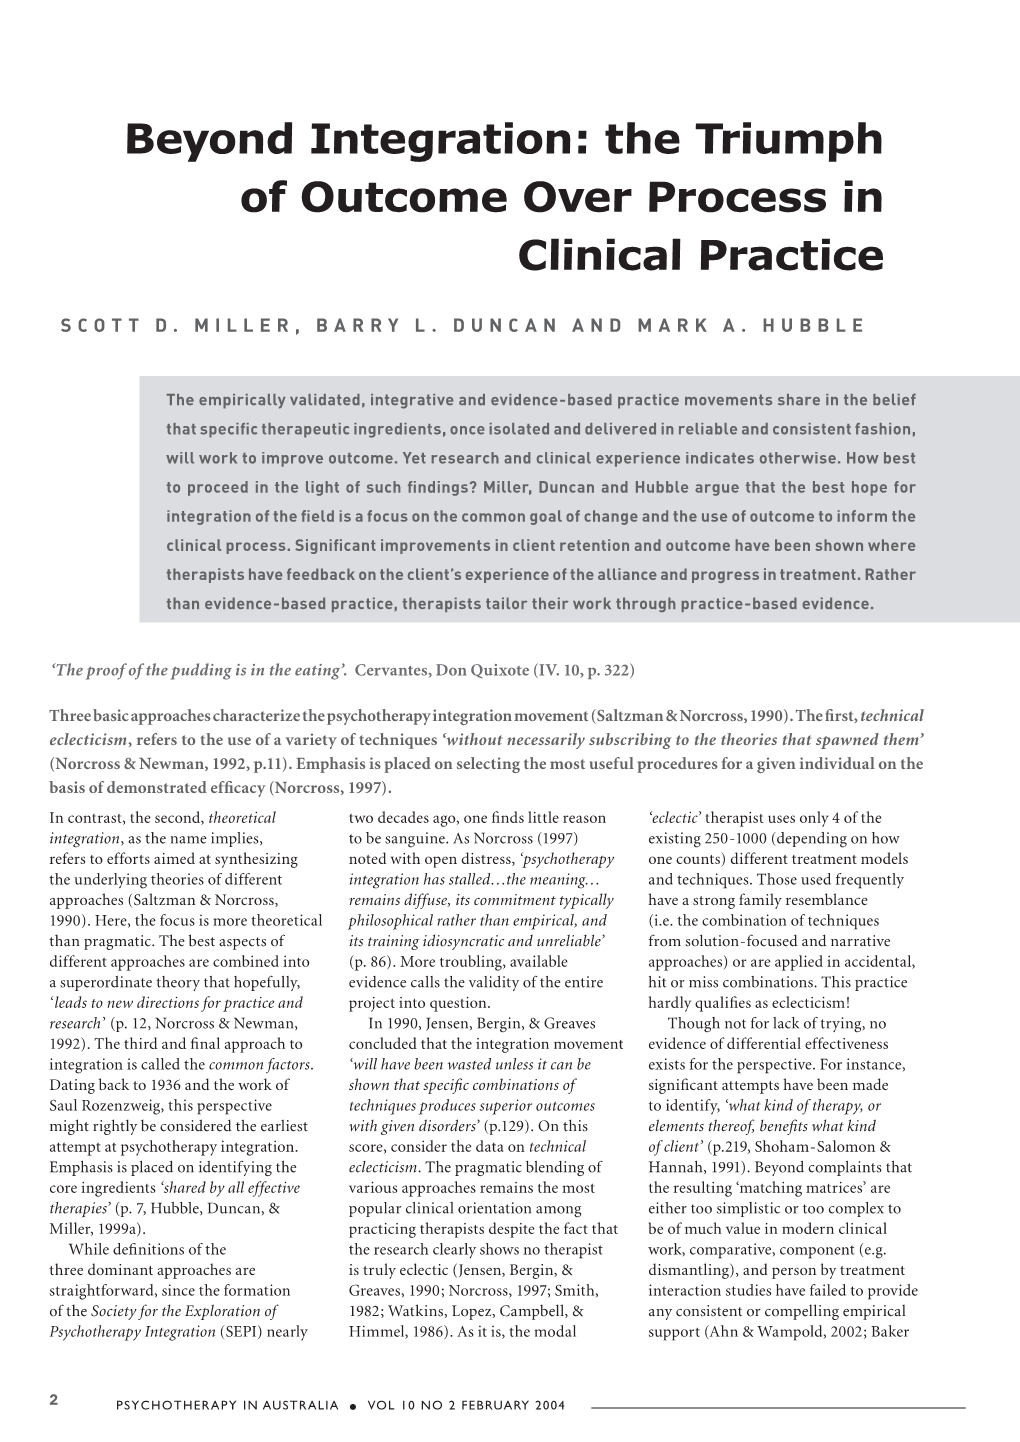 Beyond Integration: the Triumph of Outcome Over Process in Clinical Practice